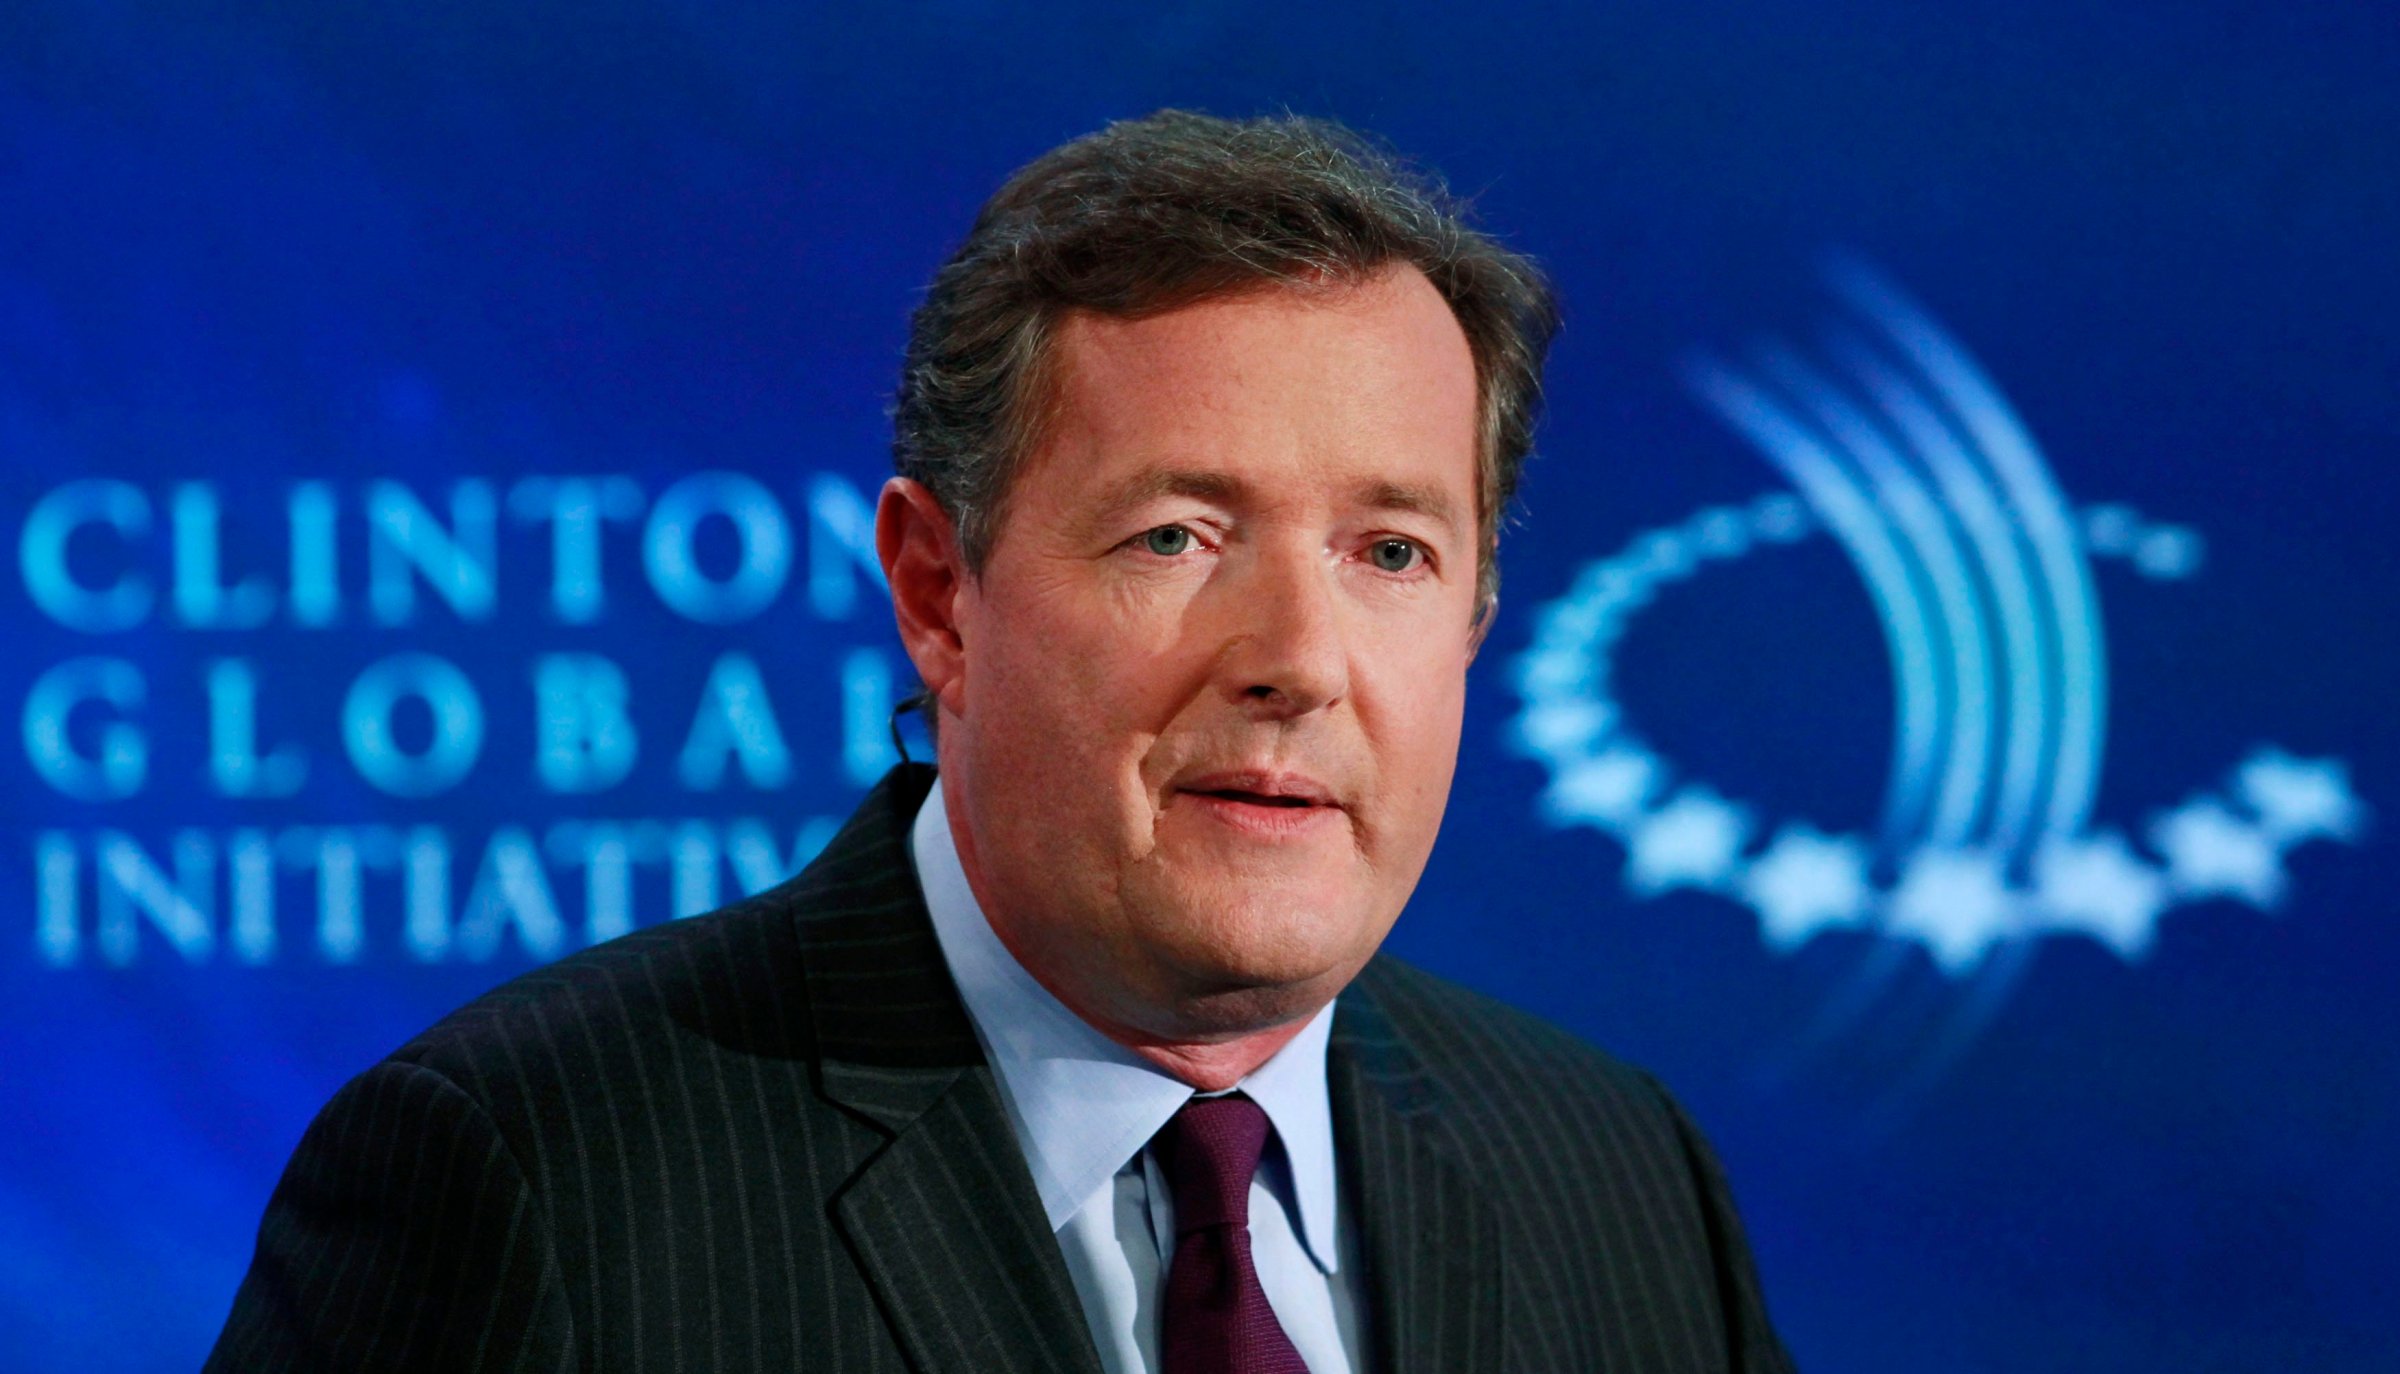 Television host Piers Morgan during the Clinton Global Initiative 2012 (CGI) in New York City, on Sept. 25, 2012.